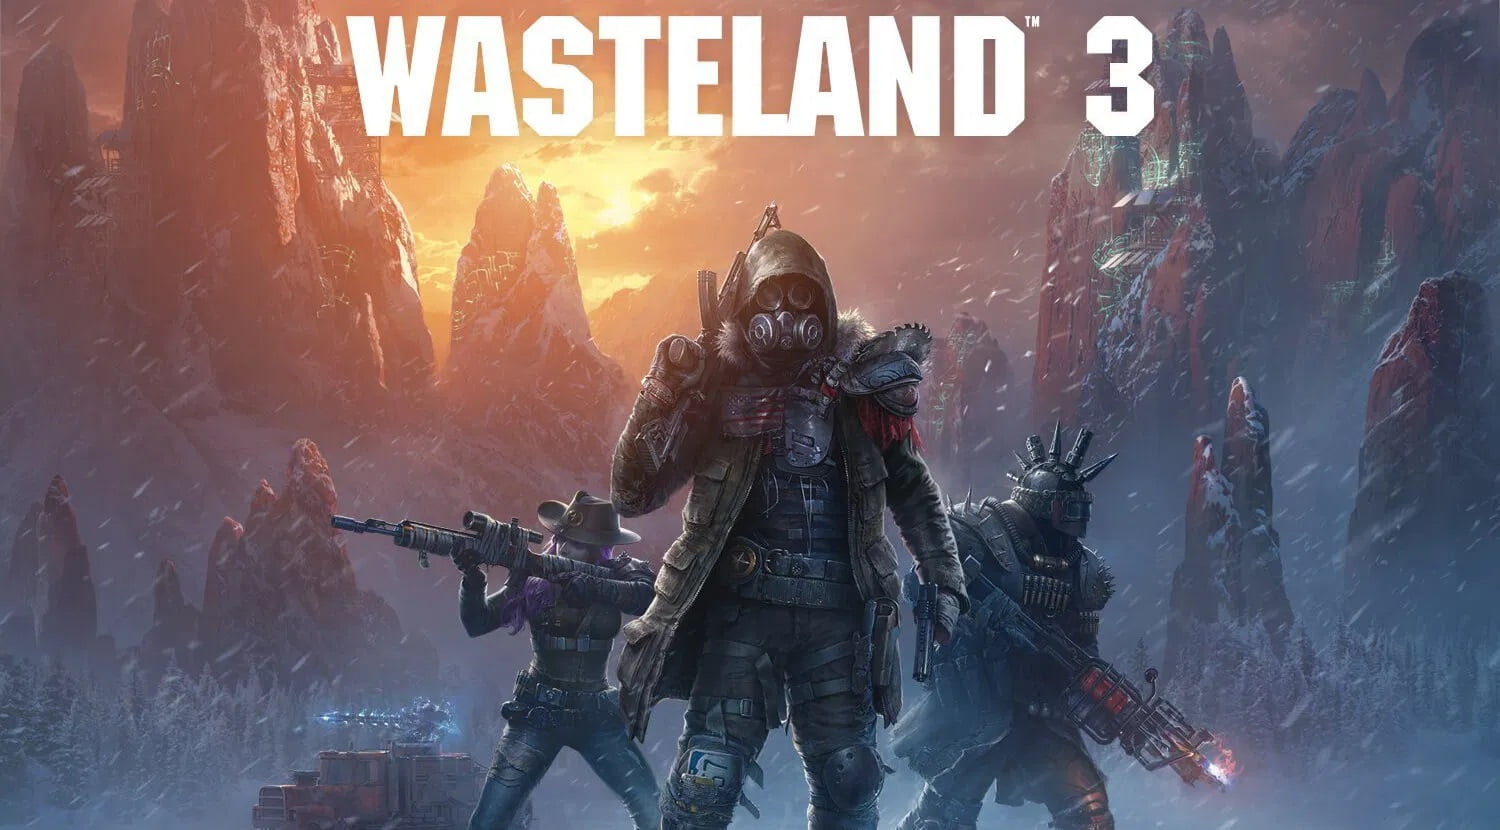 Wasteland 3 launch on Xbox One and PC